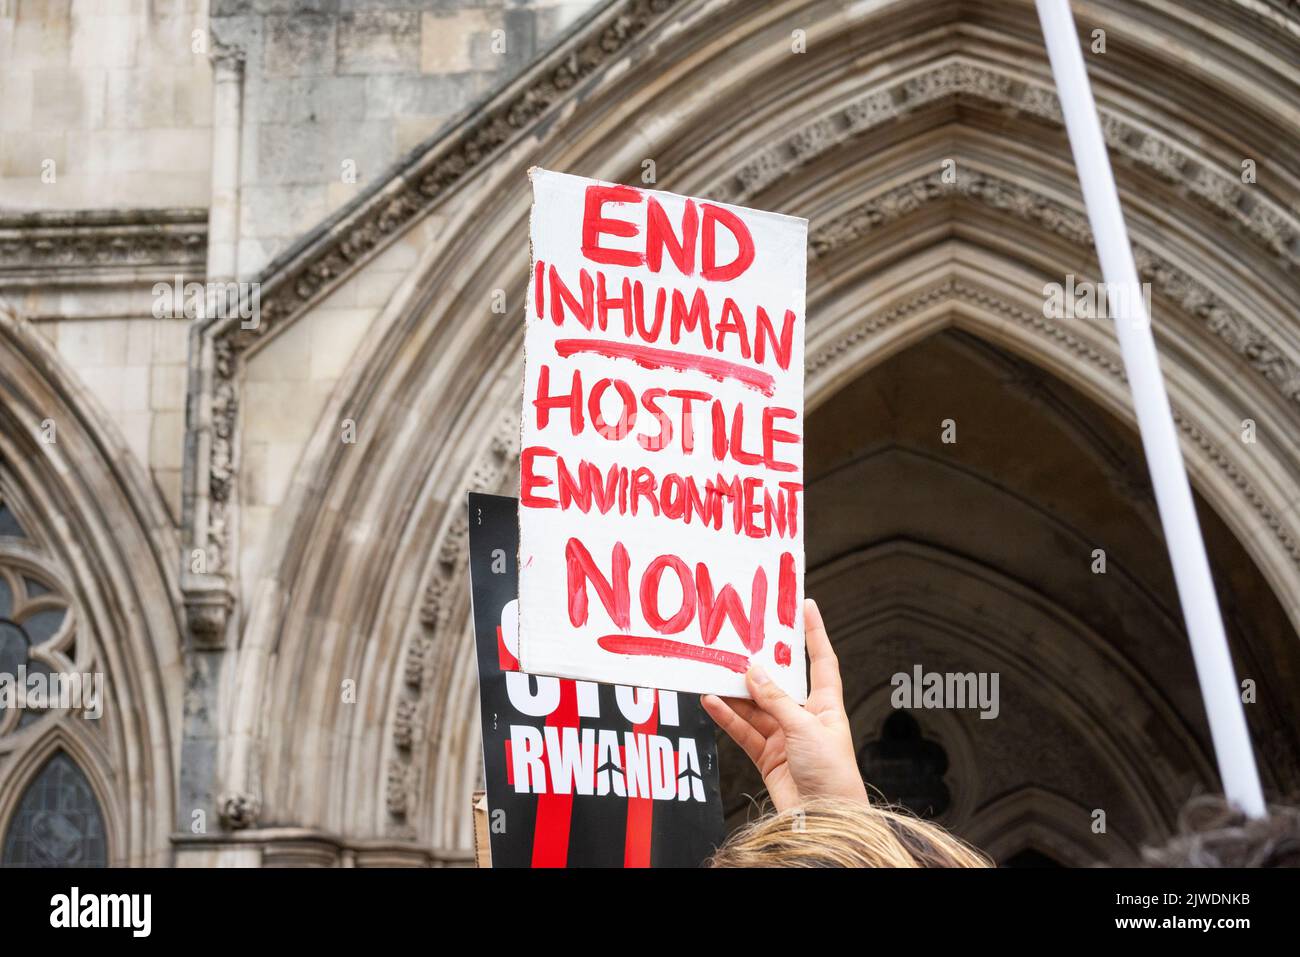 Royal Courts of Justice, Strand, London, UK. 5th Sep, 2022. Protesters have gathered outside the Royal Courts of Justice in protest at the plans to deport people to Rwanda. A postponed judicial review into the legality of the British government’s migrant deportation policy is being held inside Stock Photo